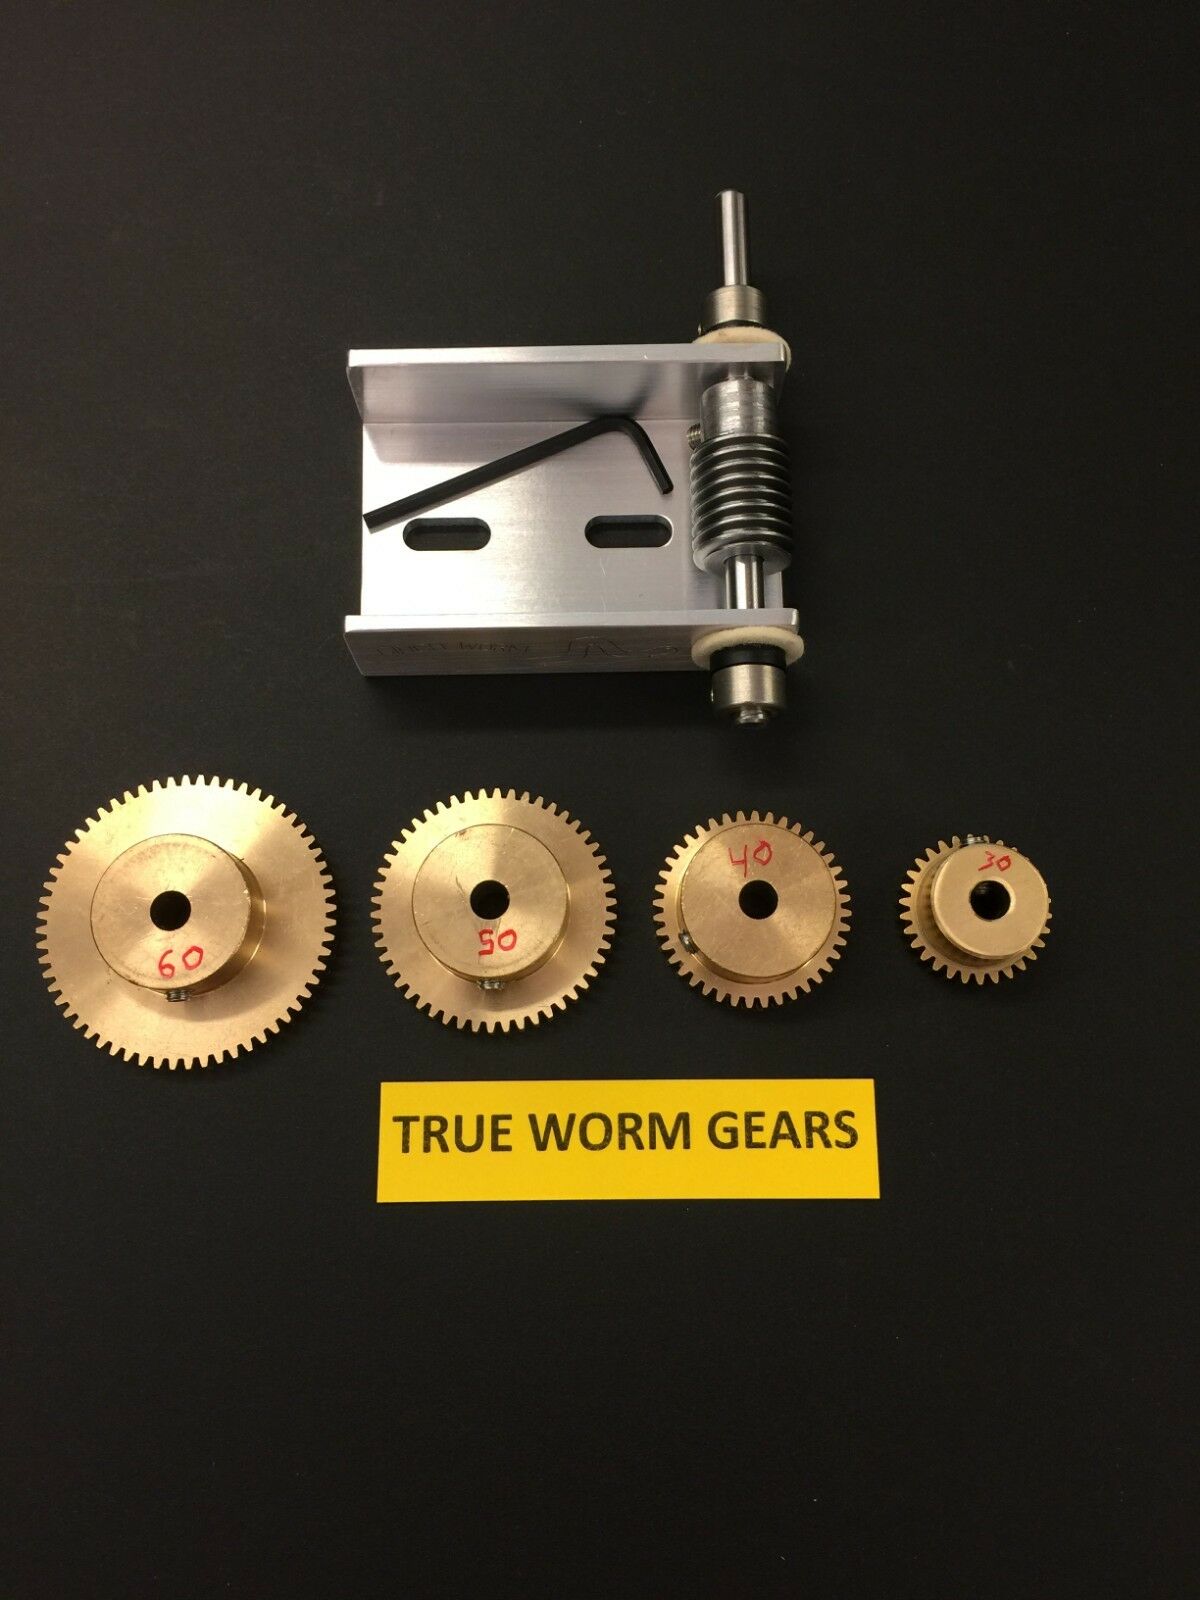 Matching Set Of Worm Gears With Ez Cinch Worm Bracket 1/4" Bore And Spur Gears !